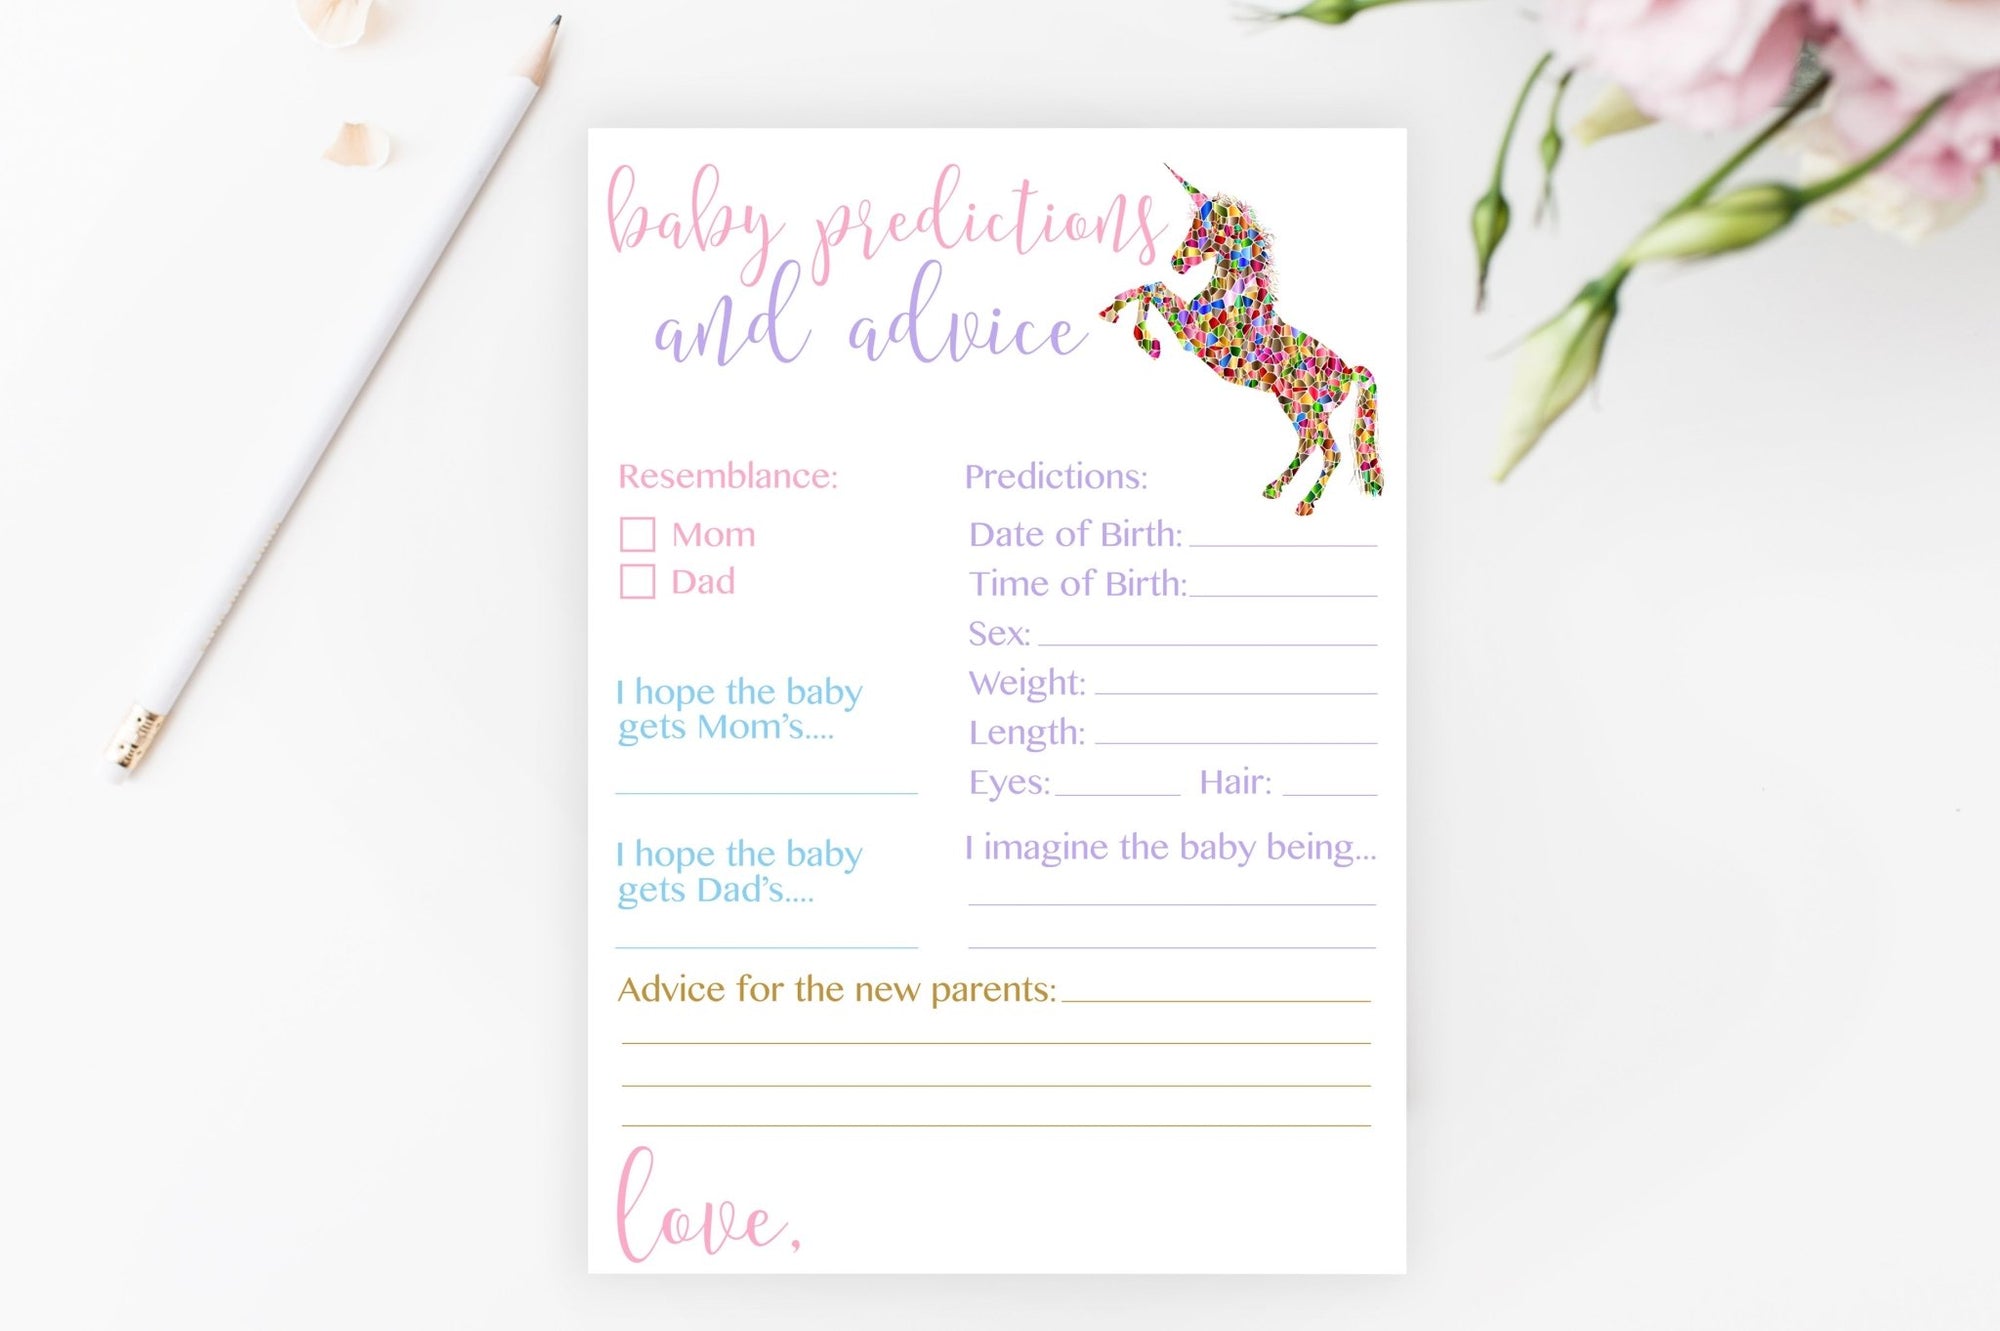 Baby Predictions and Advice (with Sex) - Unicorn Printable - Pretty Collected